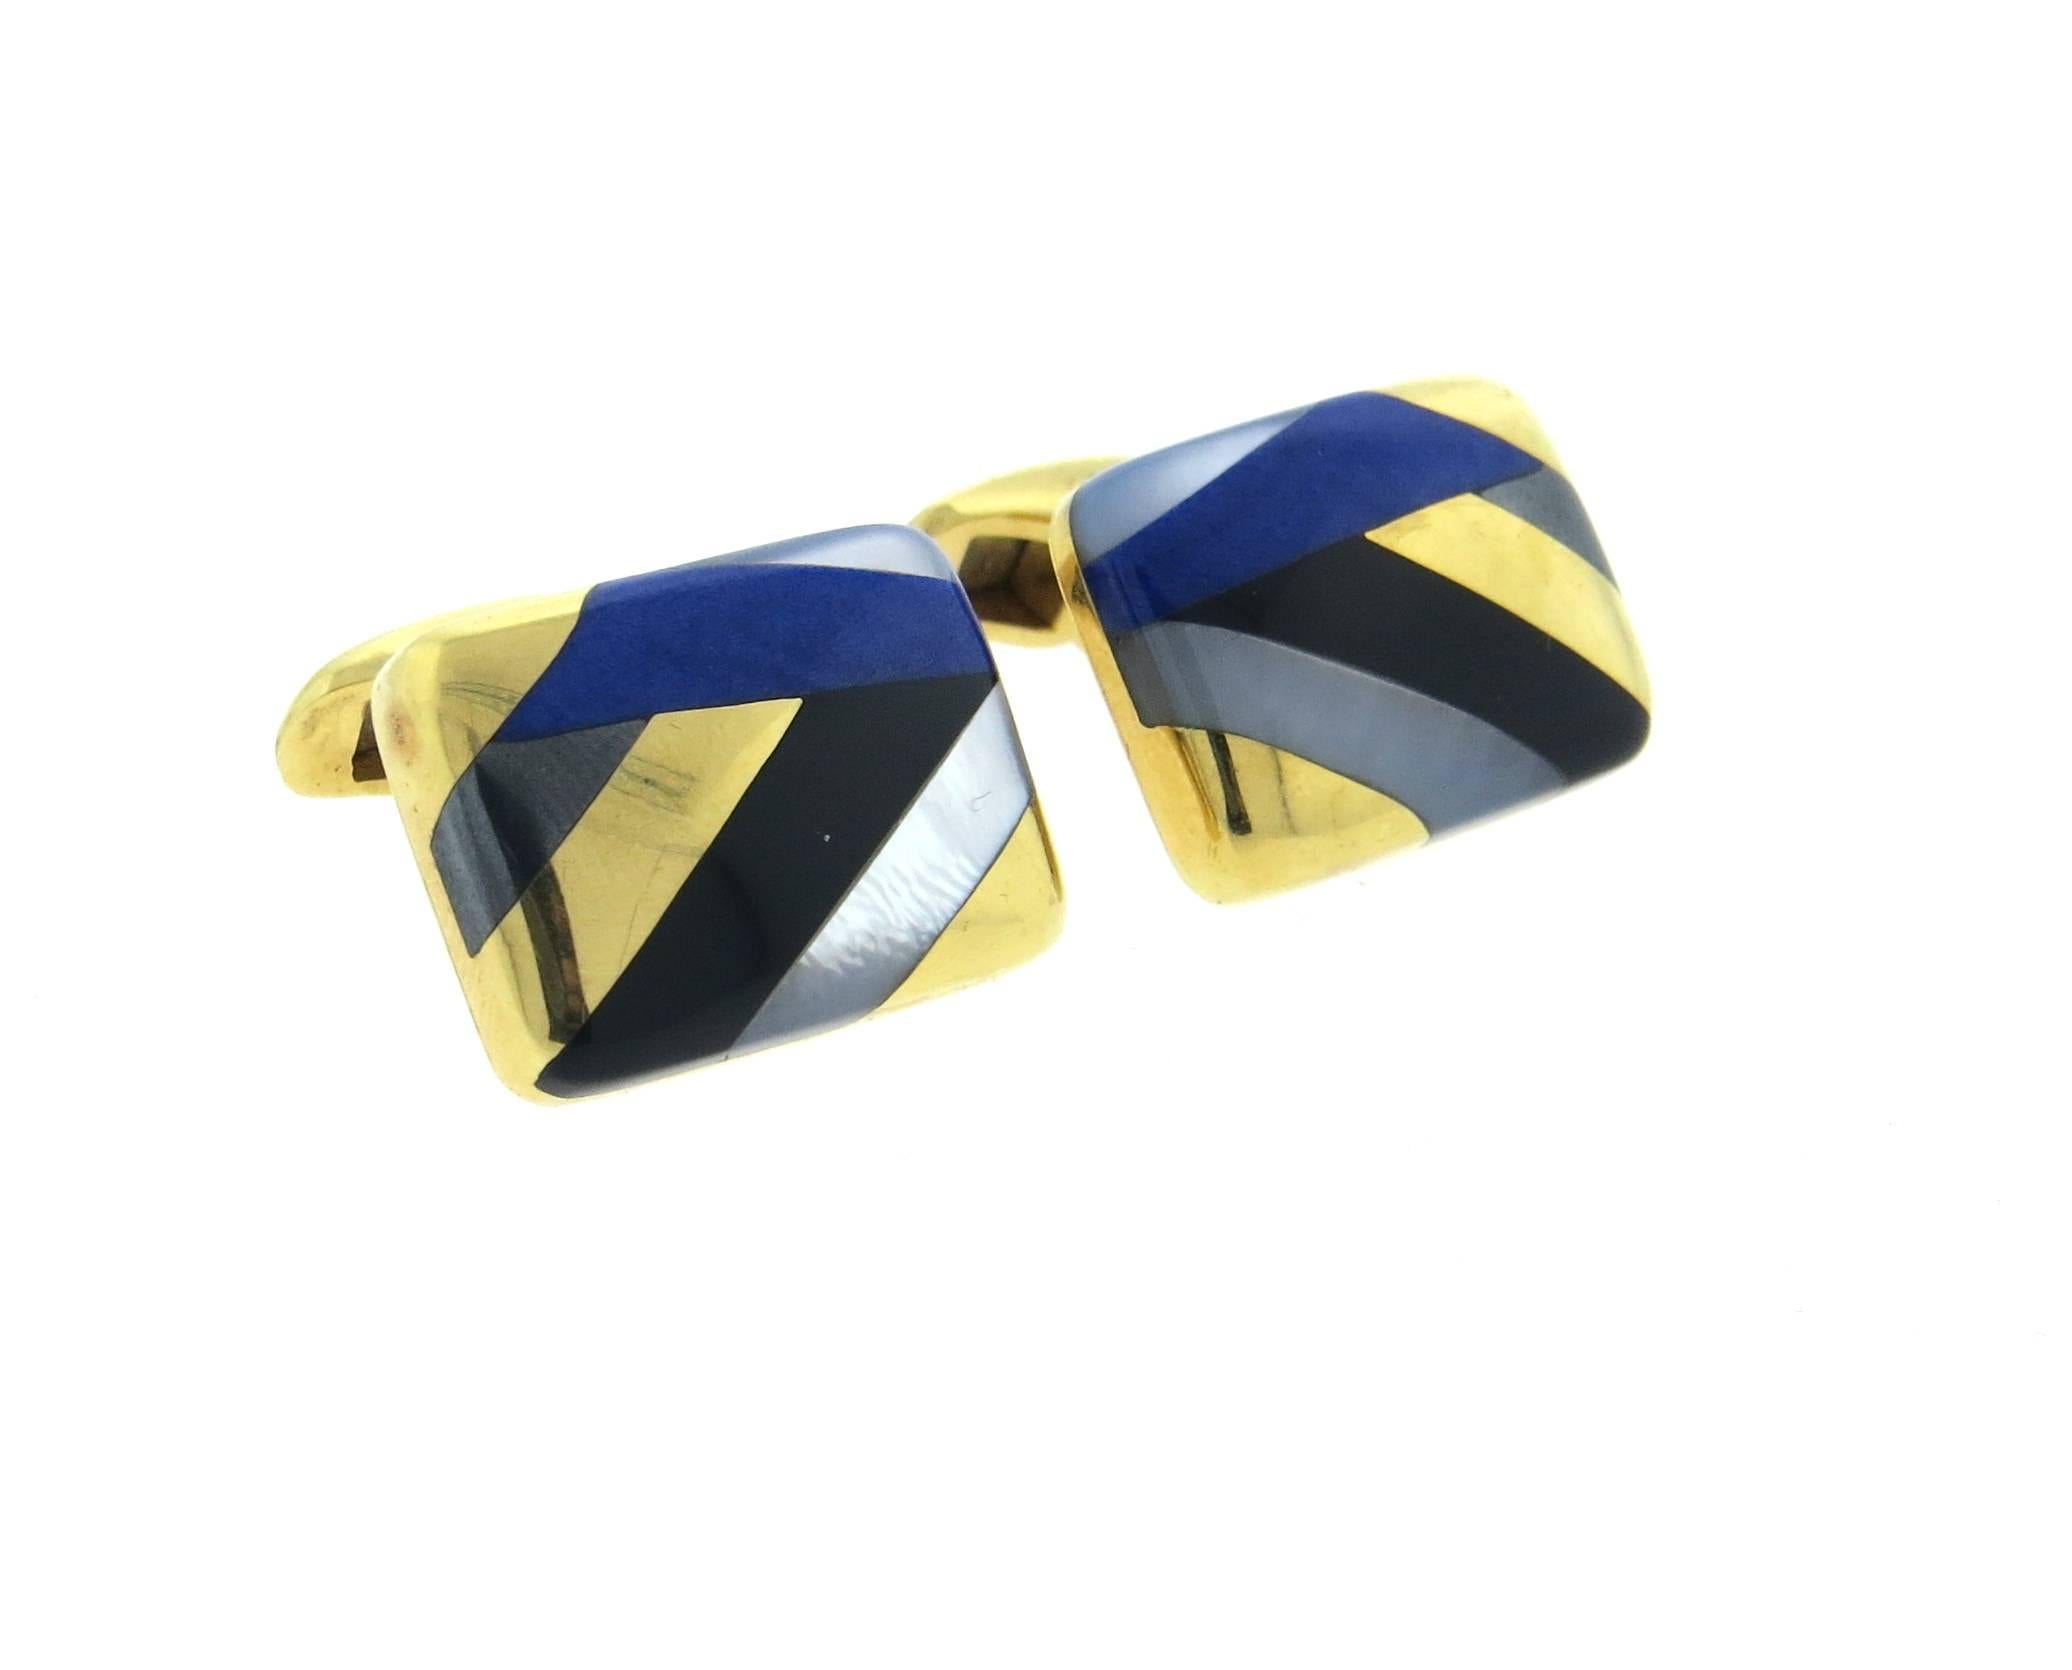 Large 18k yellow gold cufflinks, crafted by Asch Grossbardt, decorated with inlay mother of pearl, lapis lazuli and black onyx. Each top measures 21mm x 16mm. Marked AG 18k. Weight - 21.2 grams